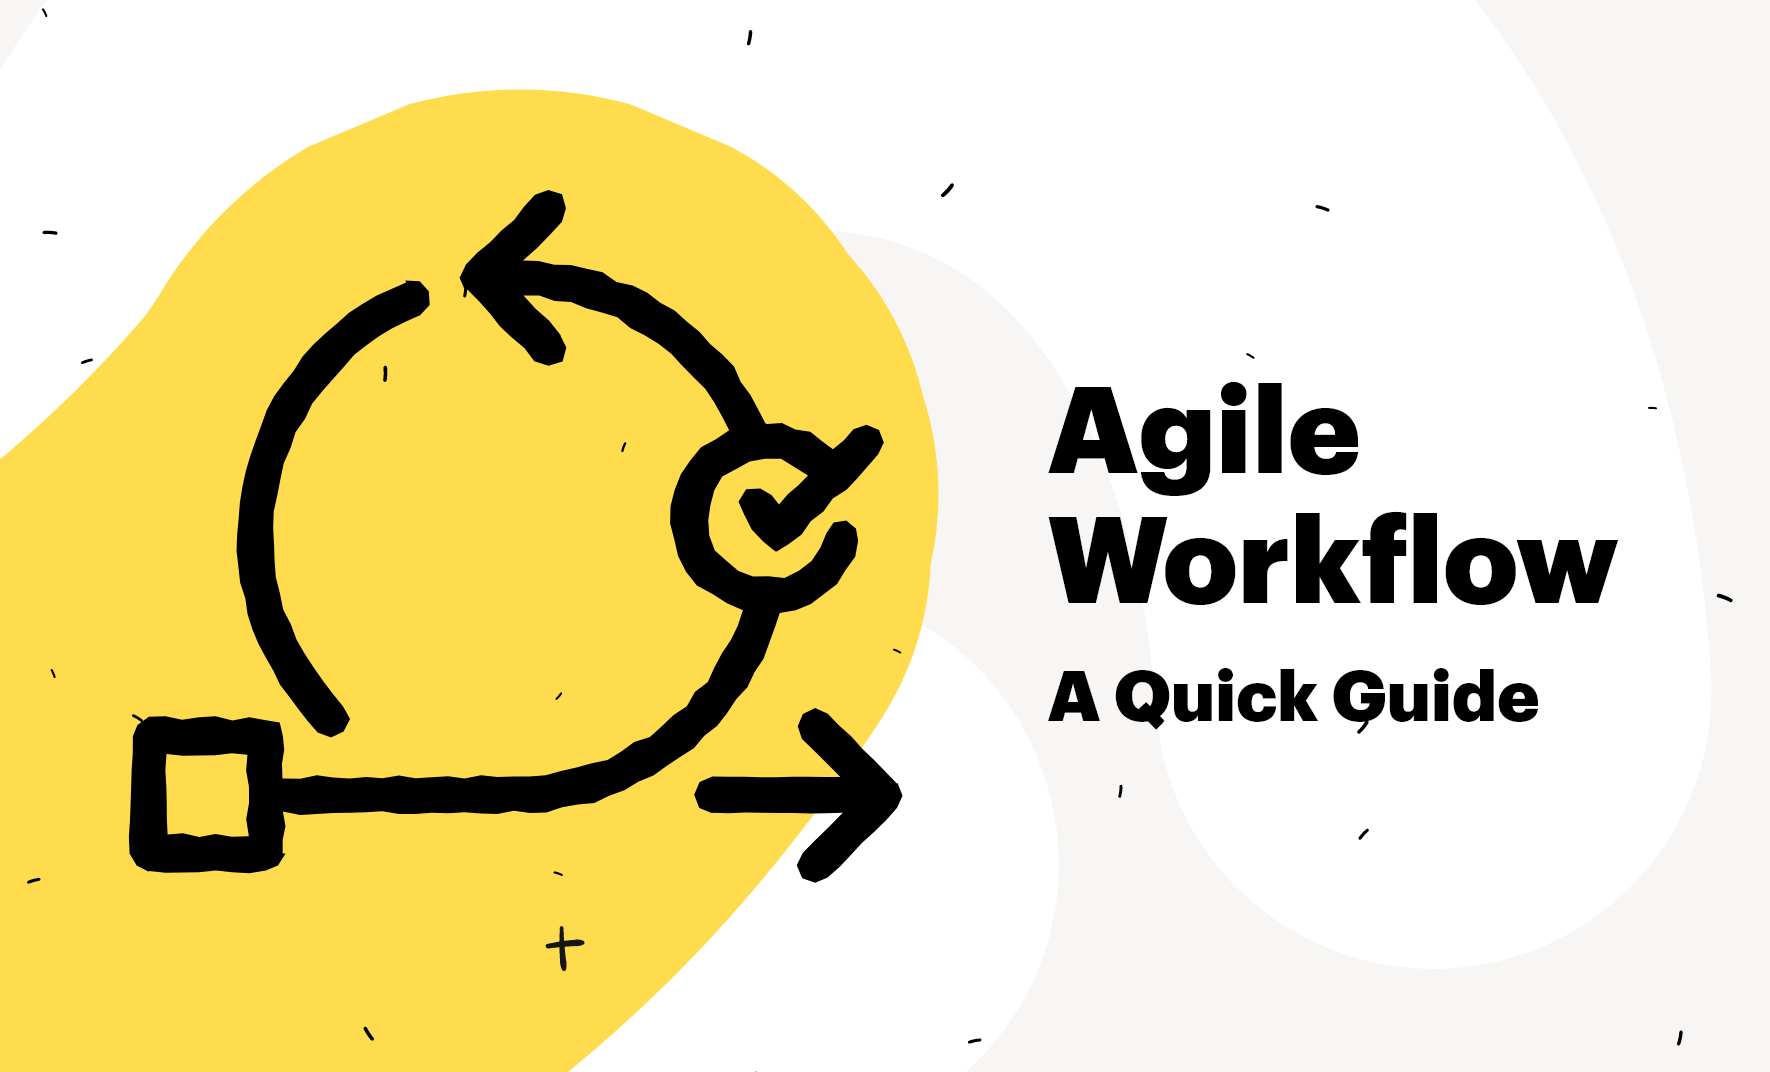 Agile Workflow - Quick Guide